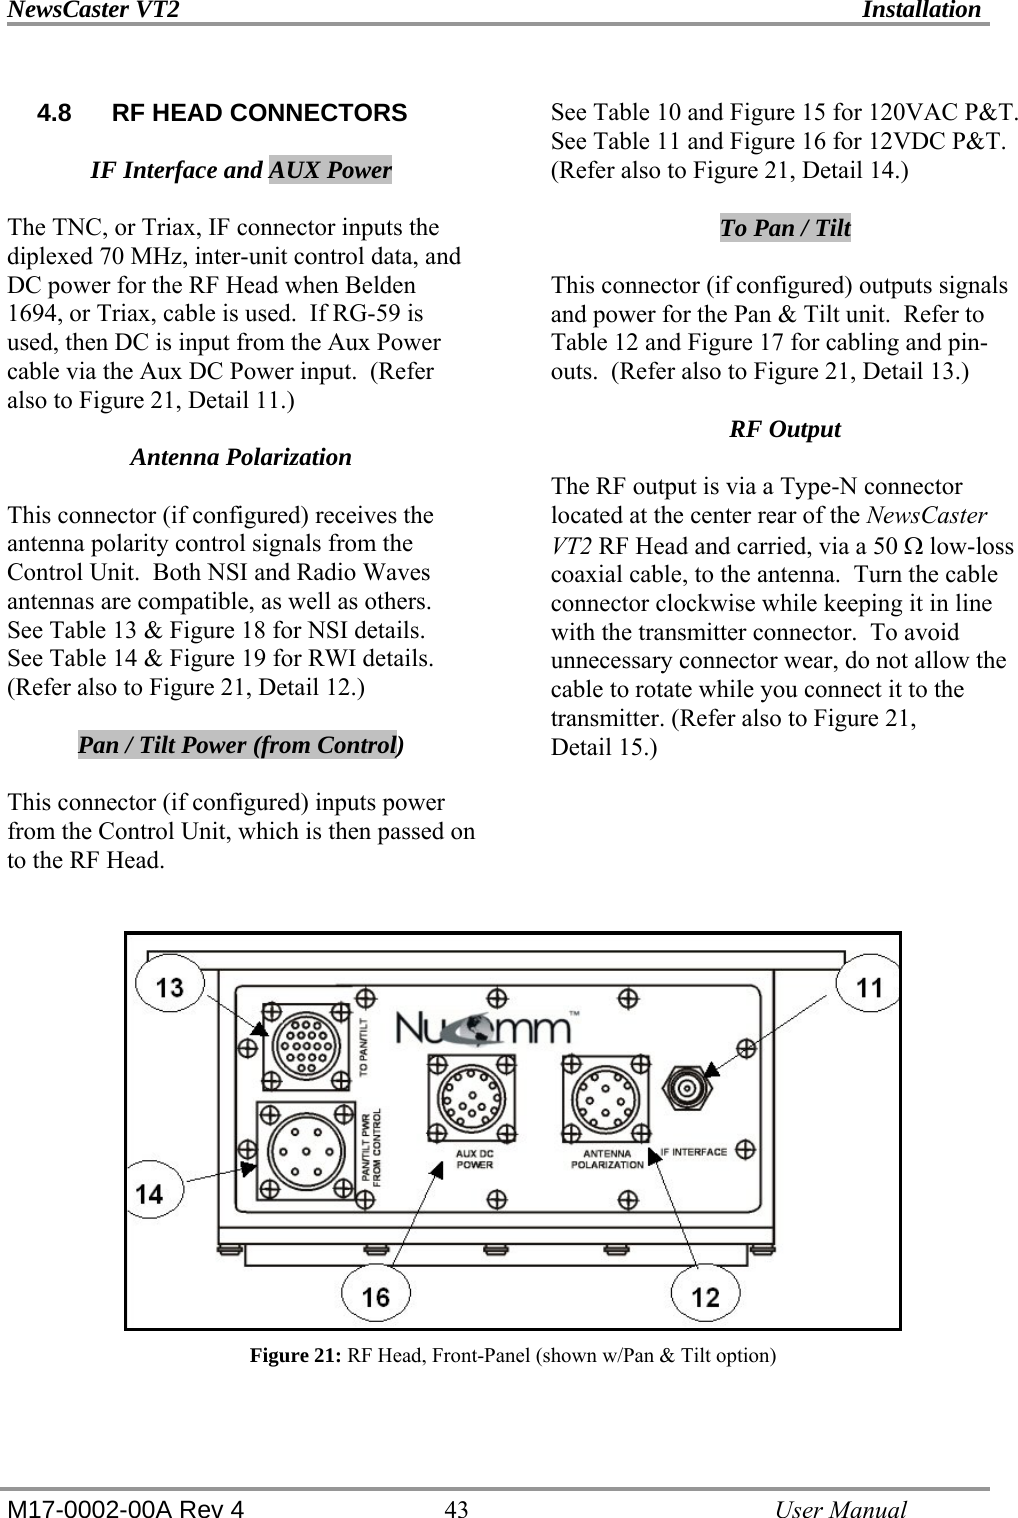 NewsCaster VT2    Installation  M17-0002-00A Rev 4 43   User Manual 4.8  RF HEAD CONNECTORS  IF Interface and AUX Power  The TNC, or Triax, IF connector inputs the diplexed 70 MHz, inter-unit control data, and DC power for the RF Head when Belden 1694, or Triax, cable is used.  If RG-59 is used, then DC is input from the Aux Power cable via the Aux DC Power input.  (Refer also to Figure 21, Detail 11.)  Antenna Polarization  This connector (if configured) receives the antenna polarity control signals from the Control Unit.  Both NSI and Radio Waves antennas are compatible, as well as others.  See Table 13 &amp; Figure 18 for NSI details.   See Table 14 &amp; Figure 19 for RWI details.  (Refer also to Figure 21, Detail 12.)  Pan / Tilt Power (from Control)  This connector (if configured) inputs power from the Control Unit, which is then passed on to the RF Head.   See Table 10 and Figure 15 for 120VAC P&amp;T.   See Table 11 and Figure 16 for 12VDC P&amp;T.  (Refer also to Figure 21, Detail 14.)  To Pan / Tilt  This connector (if configured) outputs signals and power for the Pan &amp; Tilt unit.  Refer to Table 12 and Figure 17 for cabling and pin-outs.  (Refer also to Figure 21, Detail 13.)  RF Output  The RF output is via a Type-N connector located at the center rear of the NewsCaster VT2 RF Head and carried, via a 50 Ω low-loss coaxial cable, to the antenna.  Turn the cable connector clockwise while keeping it in line with the transmitter connector.  To avoid unnecessary connector wear, do not allow the cable to rotate while you connect it to the transmitter. (Refer also to Figure 21,  Detail 15.)    Figure 21: RF Head, Front-Panel (shown w/Pan &amp; Tilt option)  